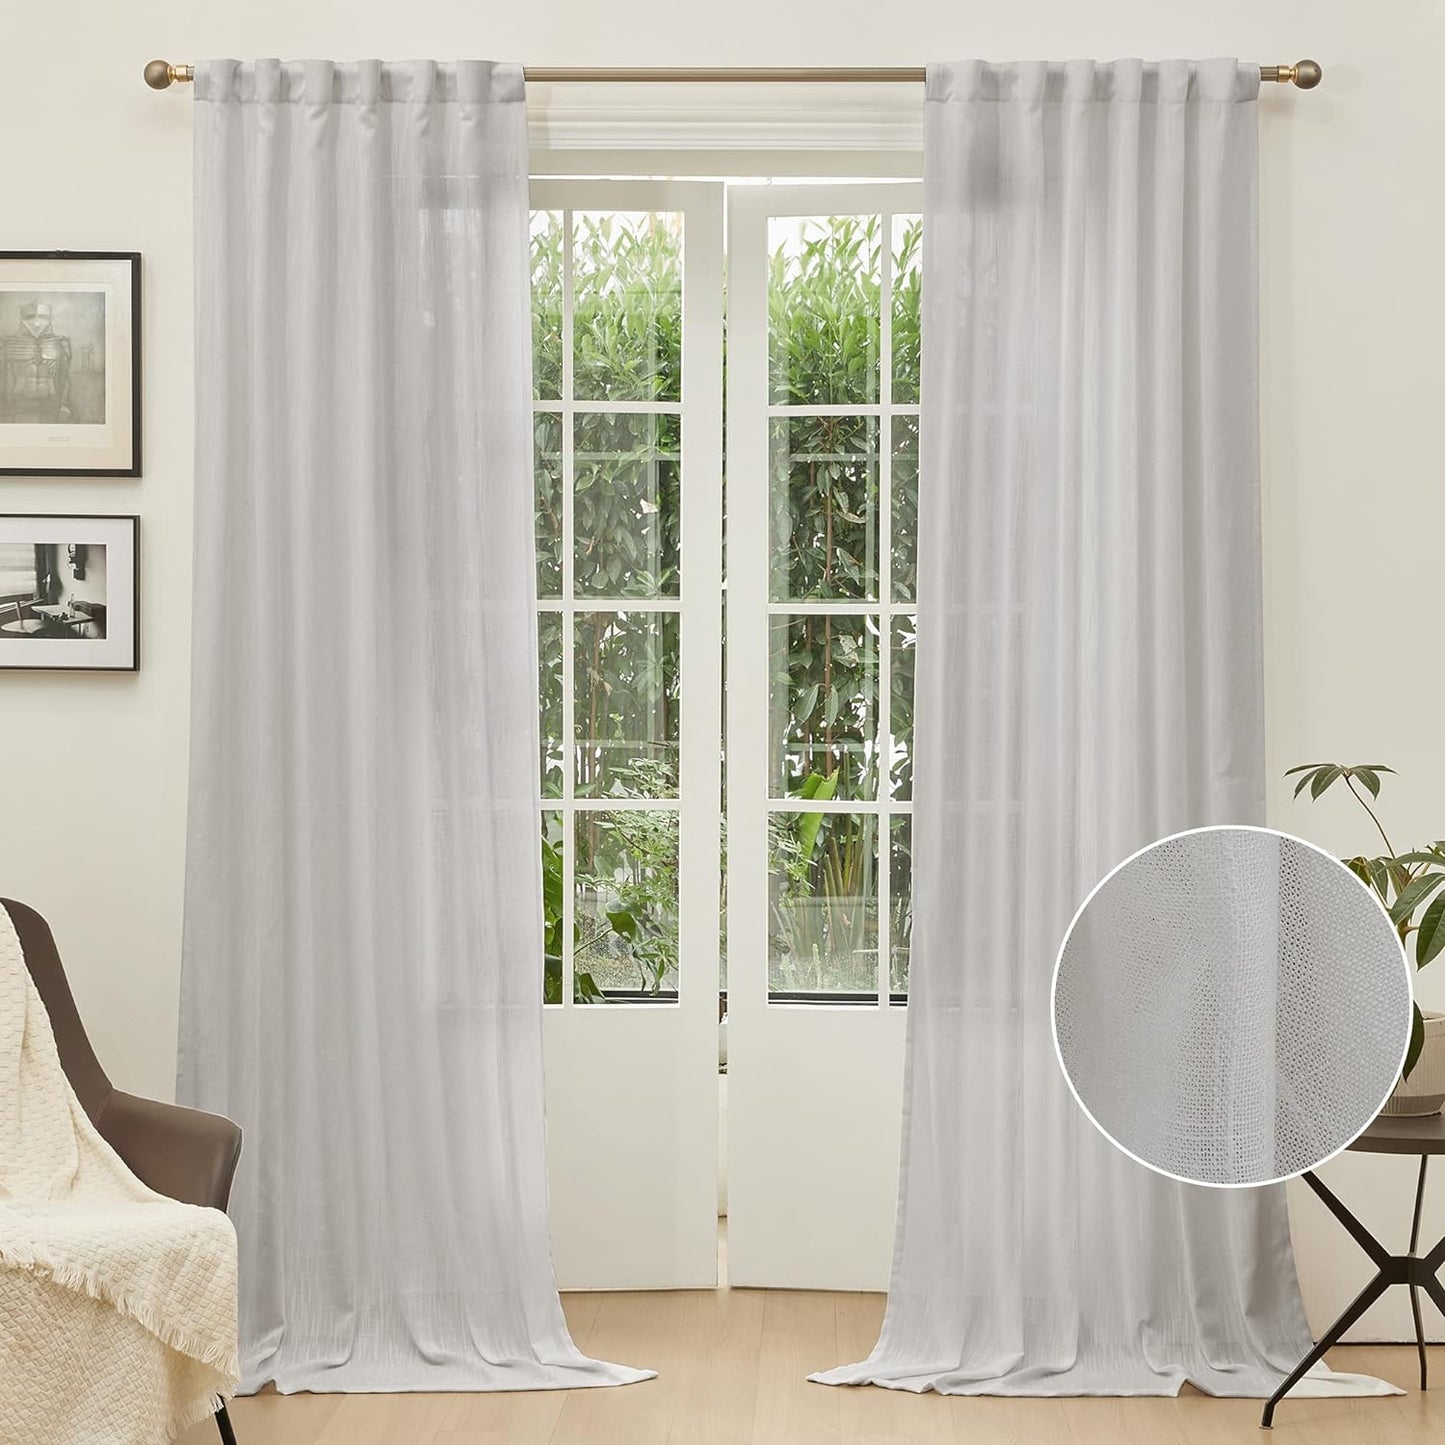 MYSKY HOME 90 Inch Curtains for Sliding Glass Door Windows, Living Room Decoration Cotton Drapes Soft Comfortable Touch Farmhouse Country Patio Treatment Set, 50" Width, Natural, 2 Panels  MYSKYTEX Light Grey 50"W X 108"L 